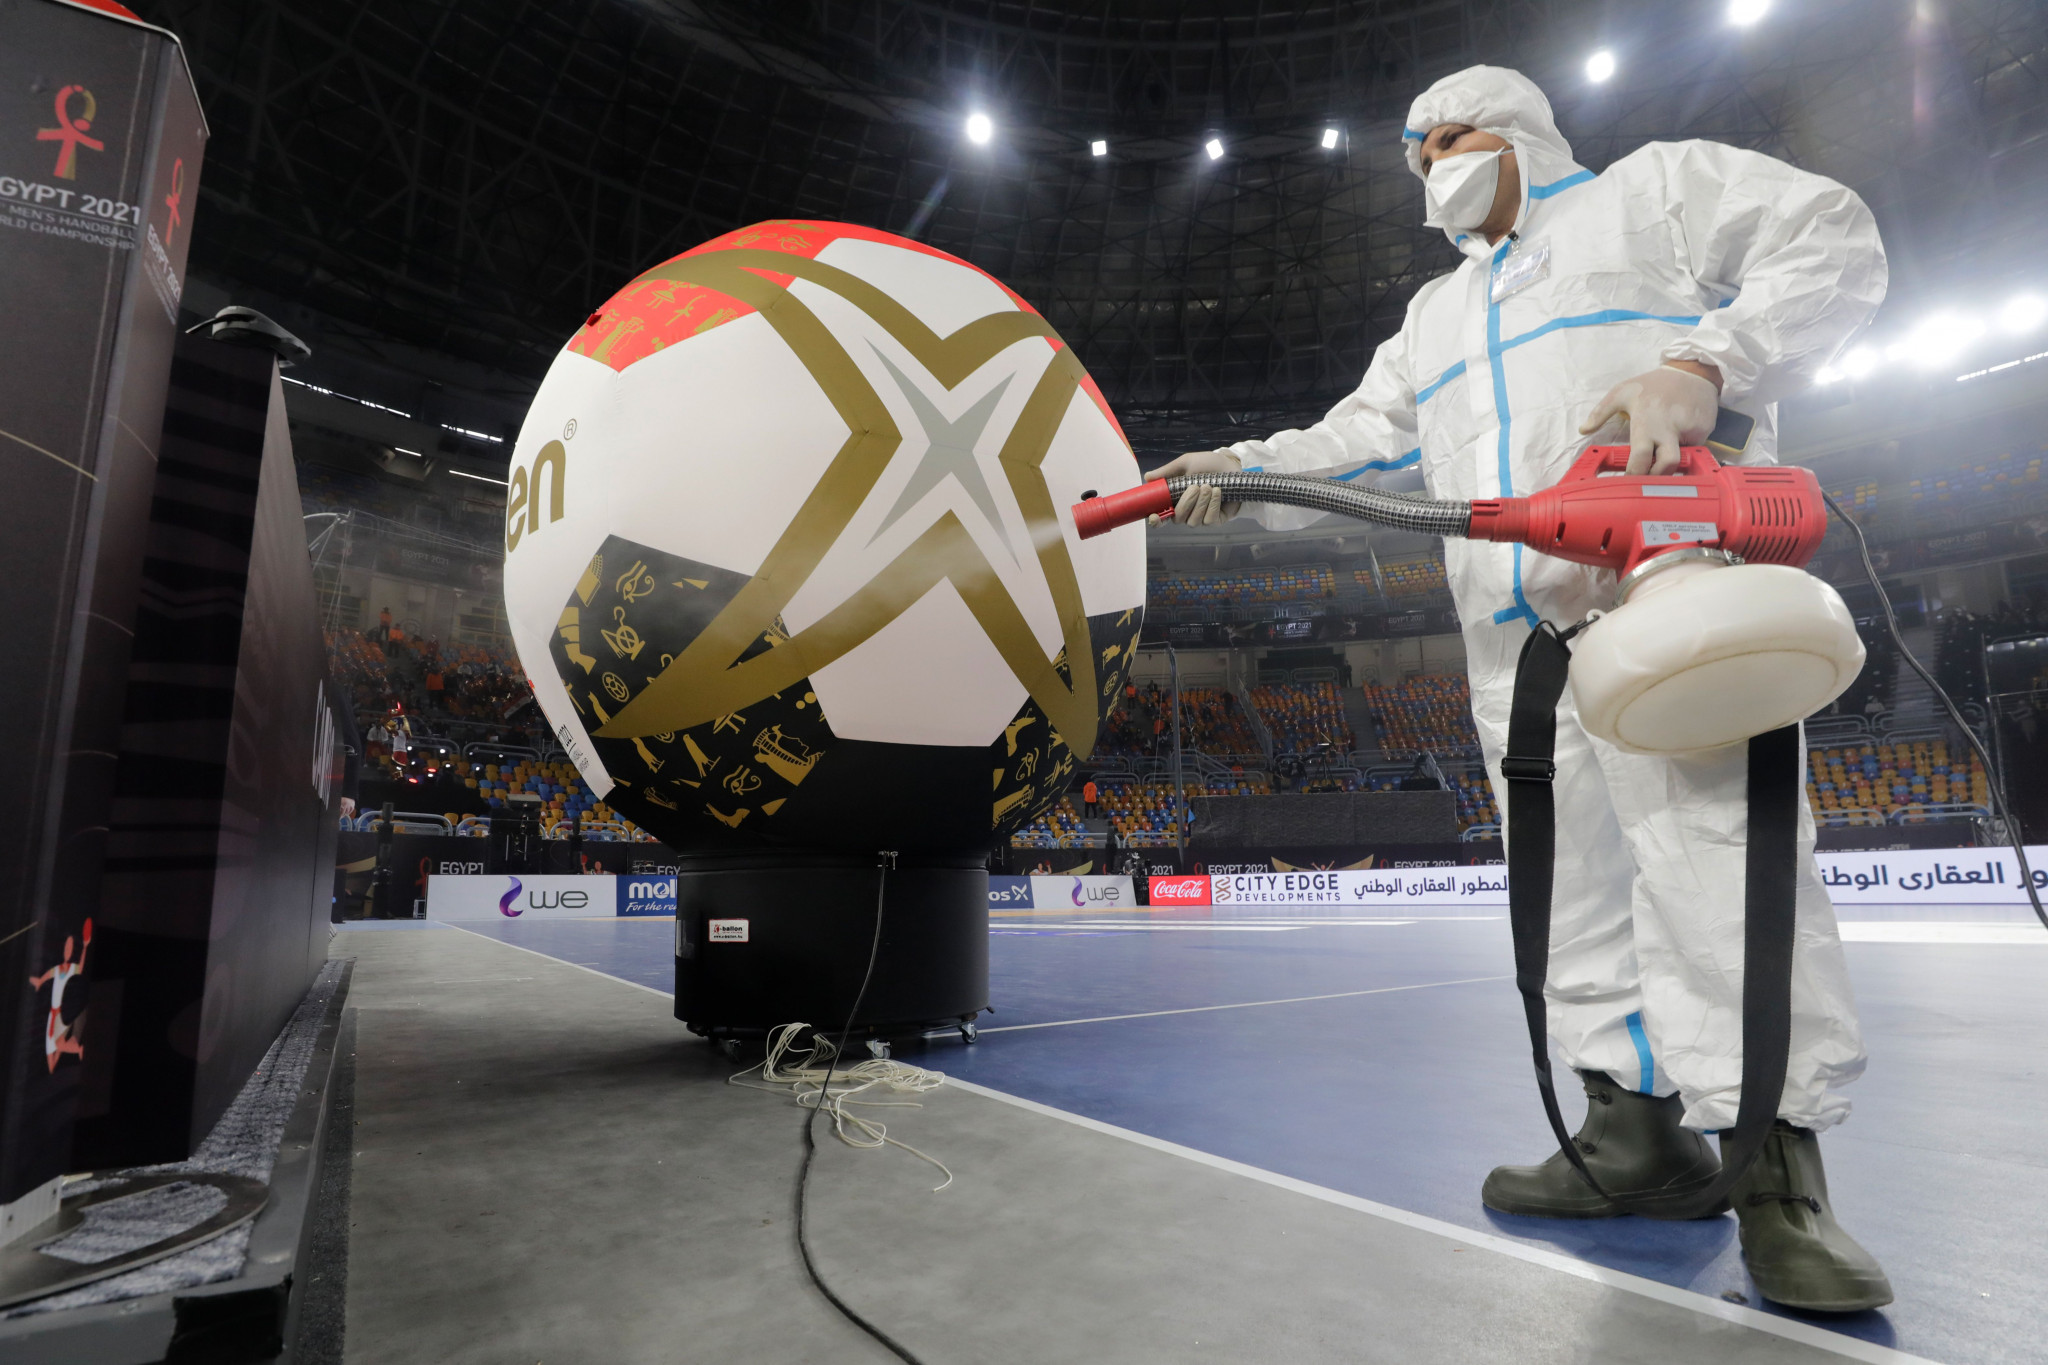 The Men's Handball World Championship has begun with anti-virus measures in place in Egypt  ©Getty Images